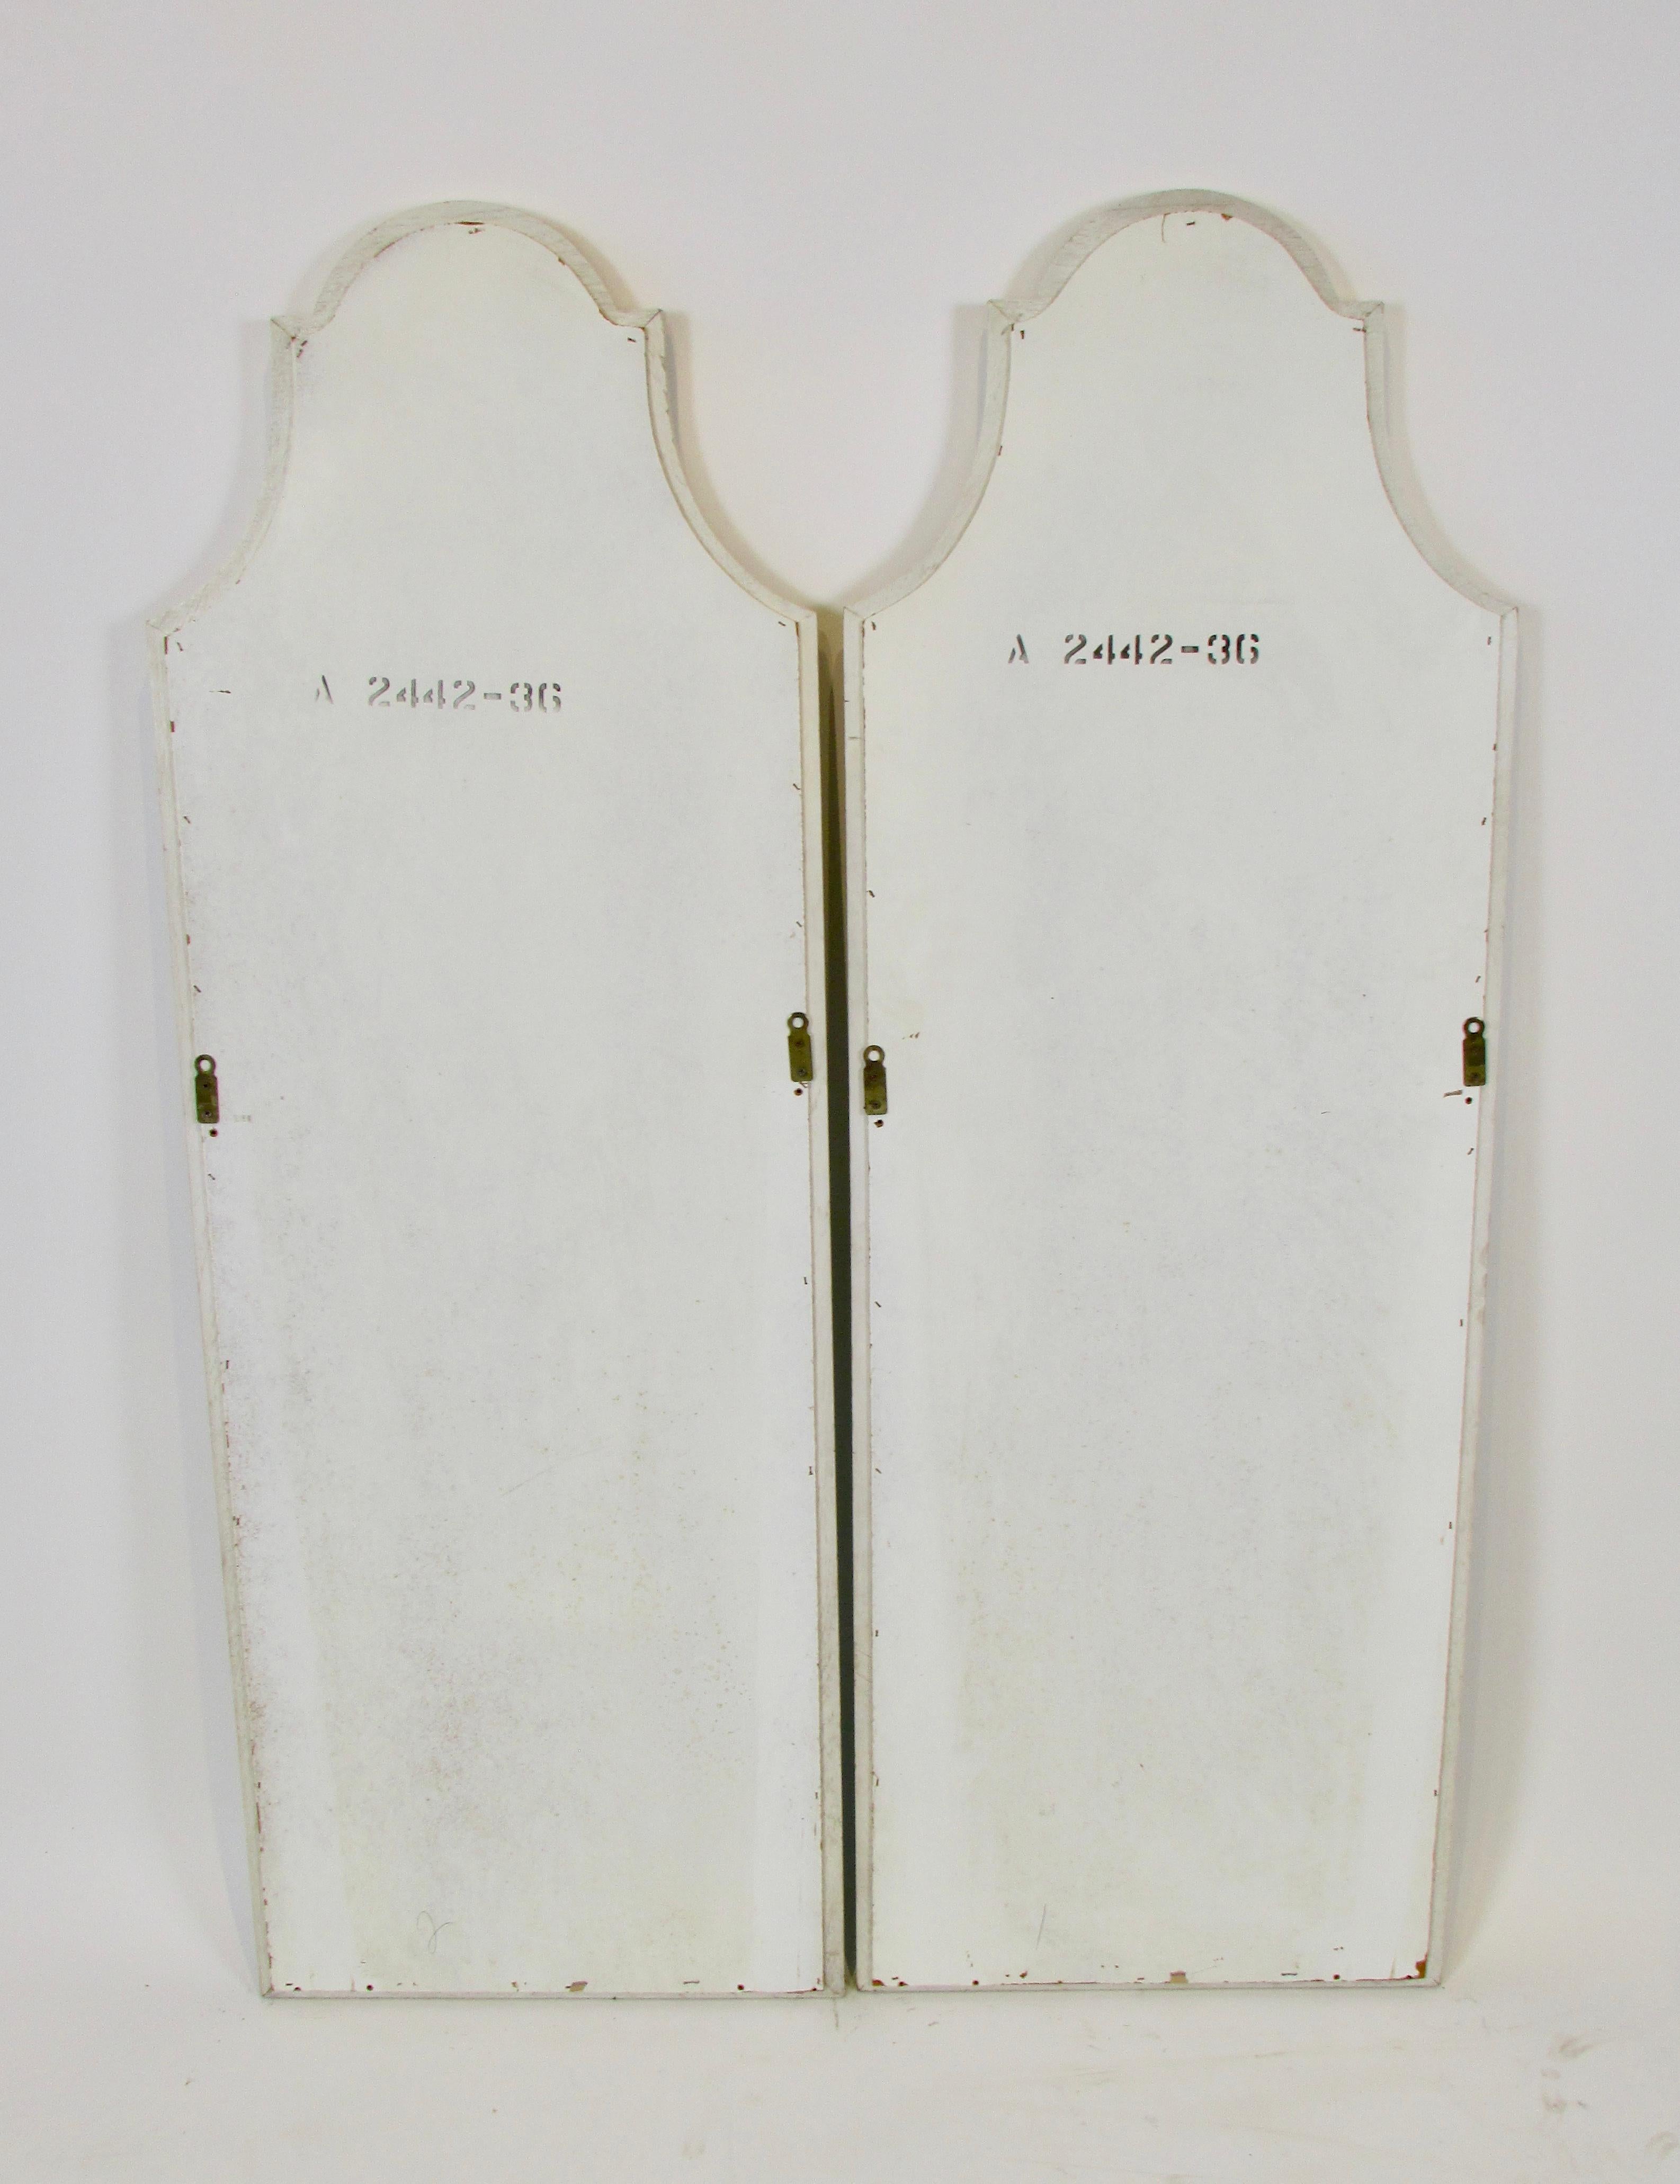 1950s Hollywood Regency Fretwork Style Mirror Pair For Sale 7